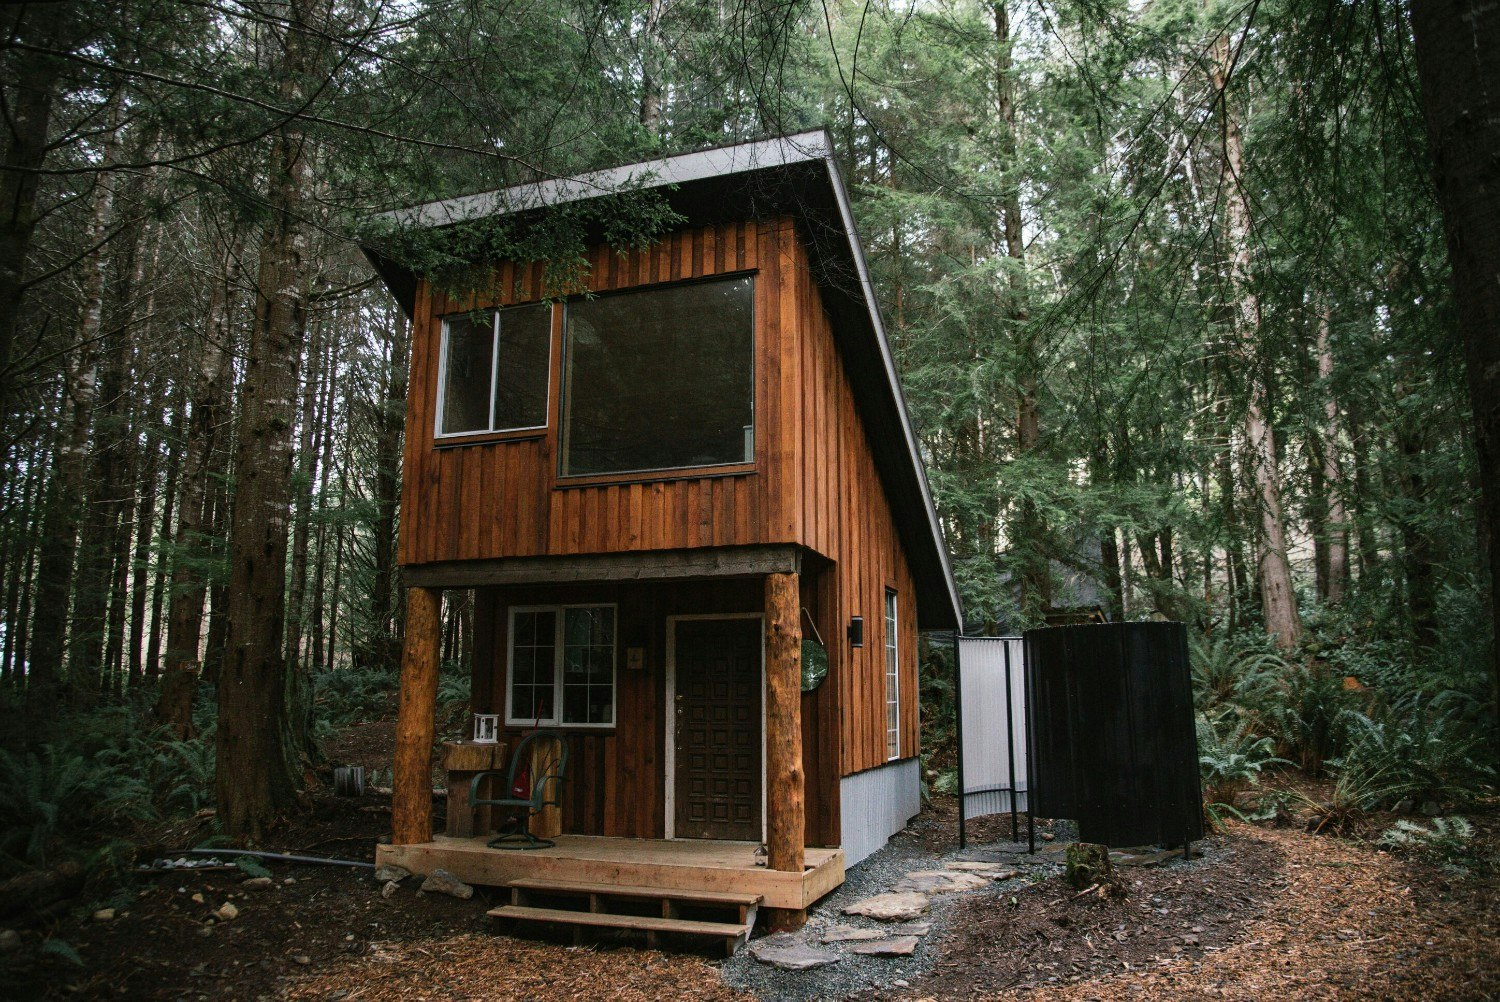 Fern Gully, a rustic cabin set among trees